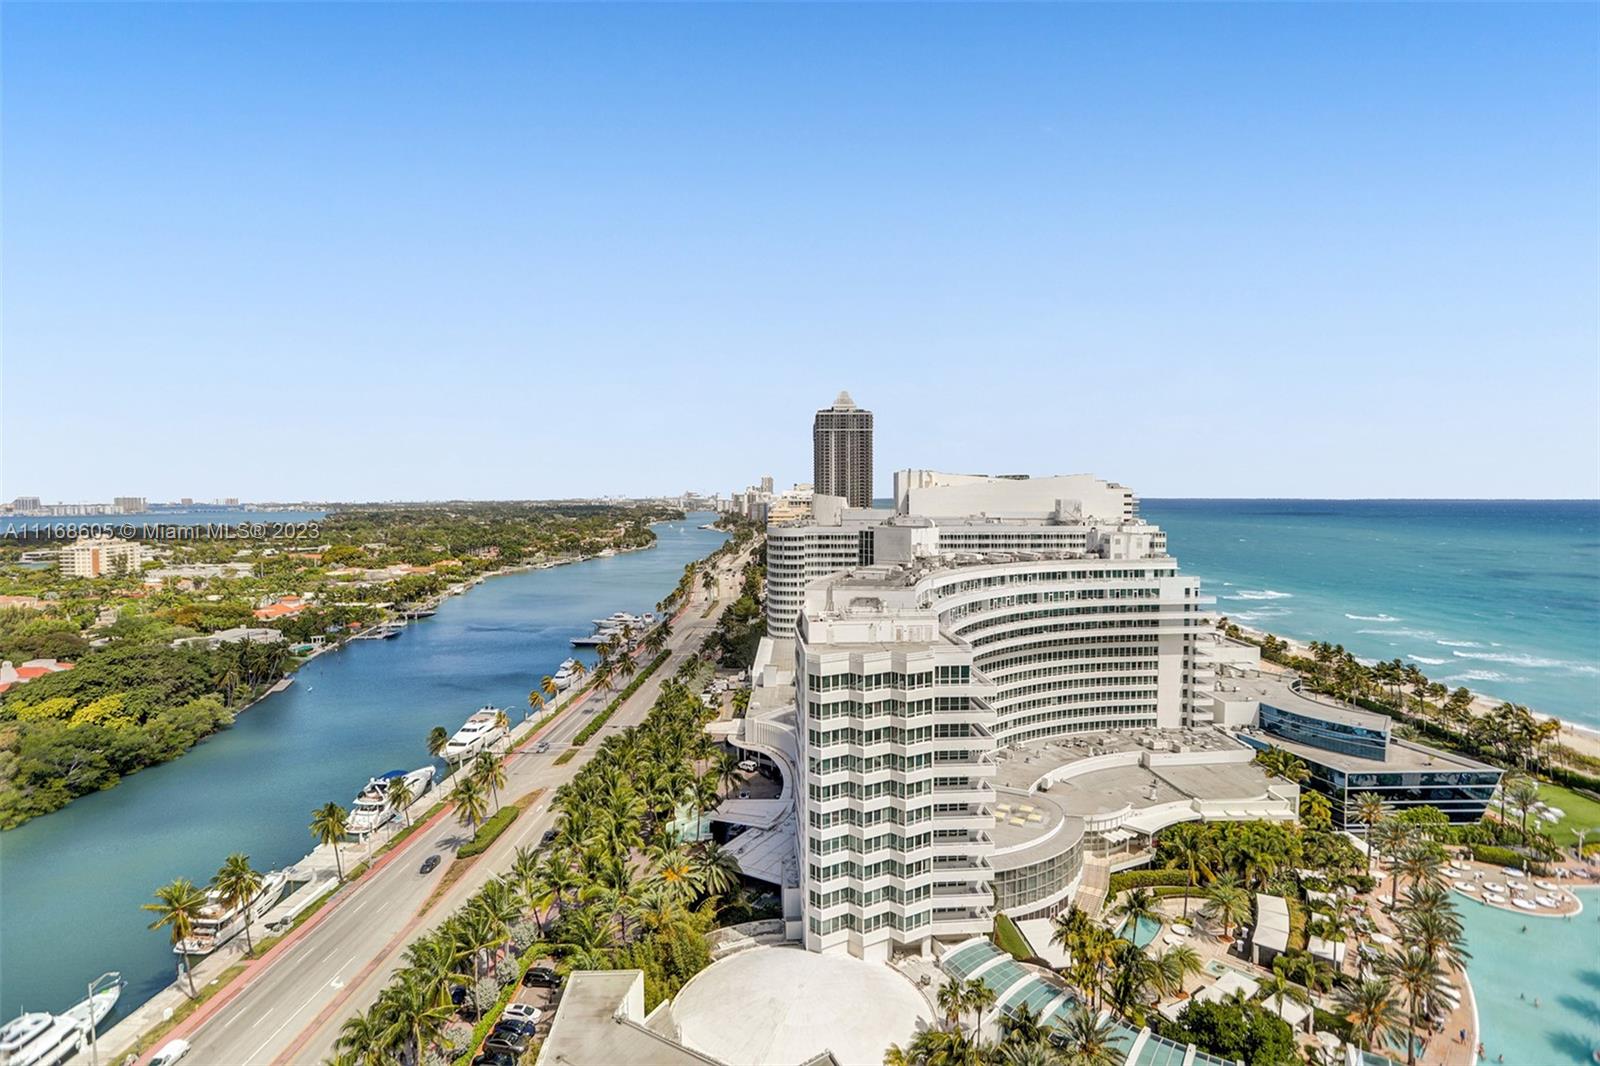 Custom designed by famous interior designer Ted Fine, this beautiful 2BD/3BA condo has spectacular unobstructed views of the ocean & bay at Fontainebleau II. All furniture, artwork and accessories included. The apartment has an open kitchen with granite countertops, three marble bathrooms with two jacuzzi tubs, washer/dryer, lots of closet space, two large balconies and floor to ceiling windows.  Enjoy full service, vacation-style living in a furnished turnkey unit. Enroll in hotel rental program & receive income while away! The Fontainebleau Resort offers luxury amenities on 22 oceanfront acres including award-winning restaurants, LIV night club, Lapis spa & state-of-the-art fitness center. Maintenance includes : AC, local calls, electricity, valet + daily free breakfast in owners lounge.